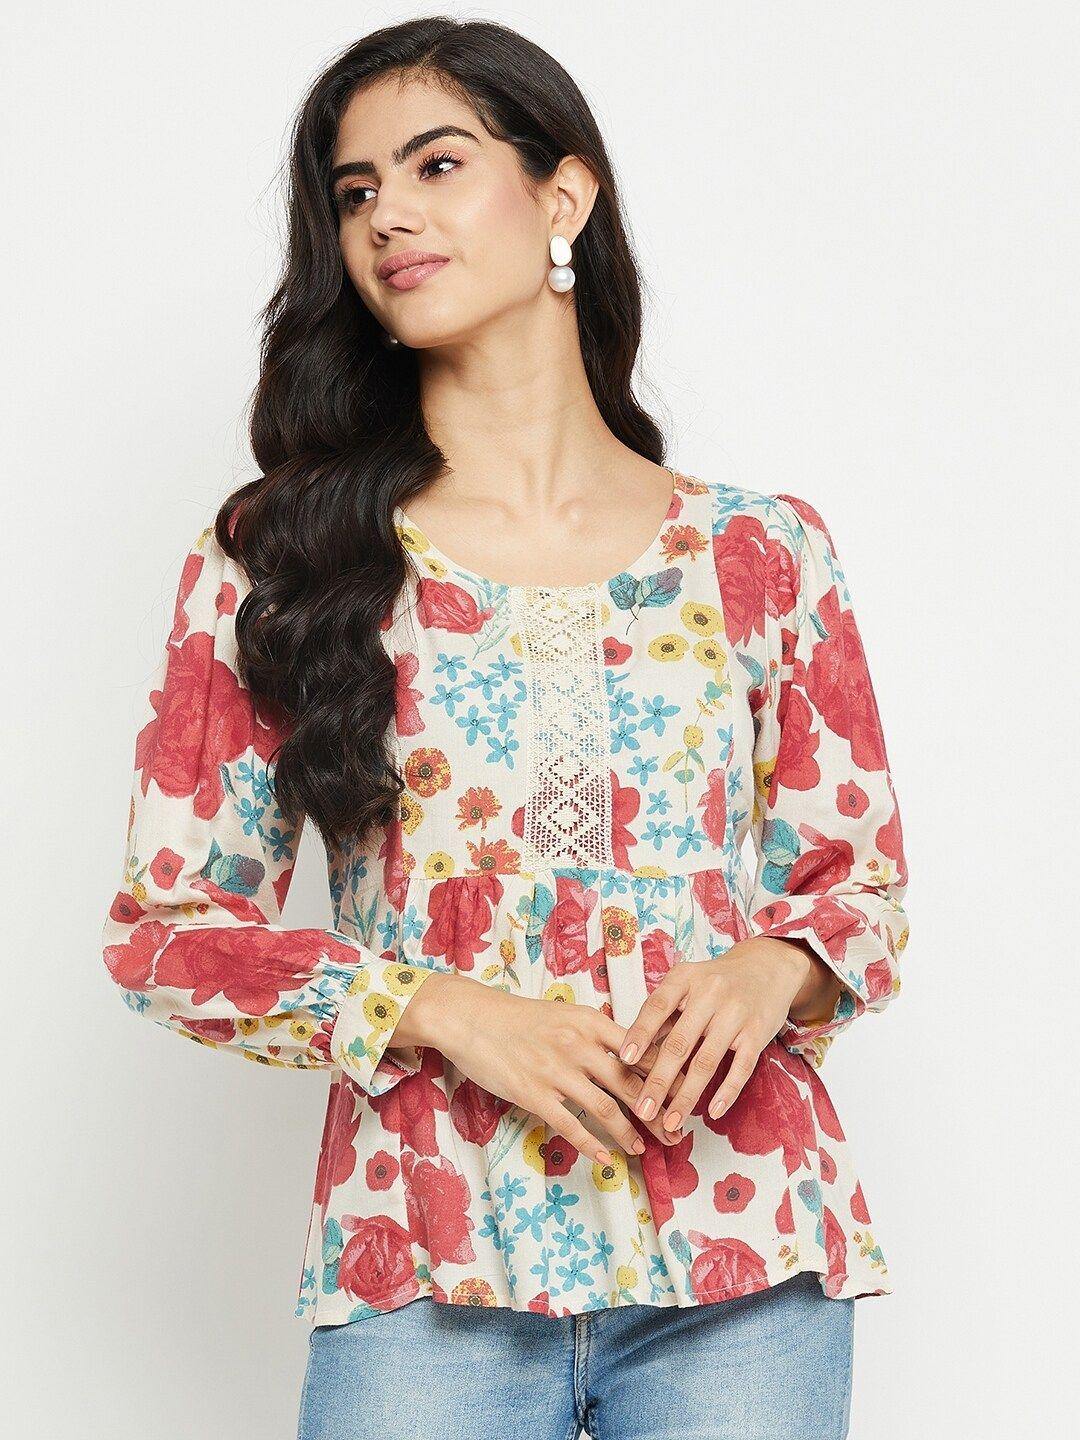 baesd floral printed cuffed sleeves cotton top